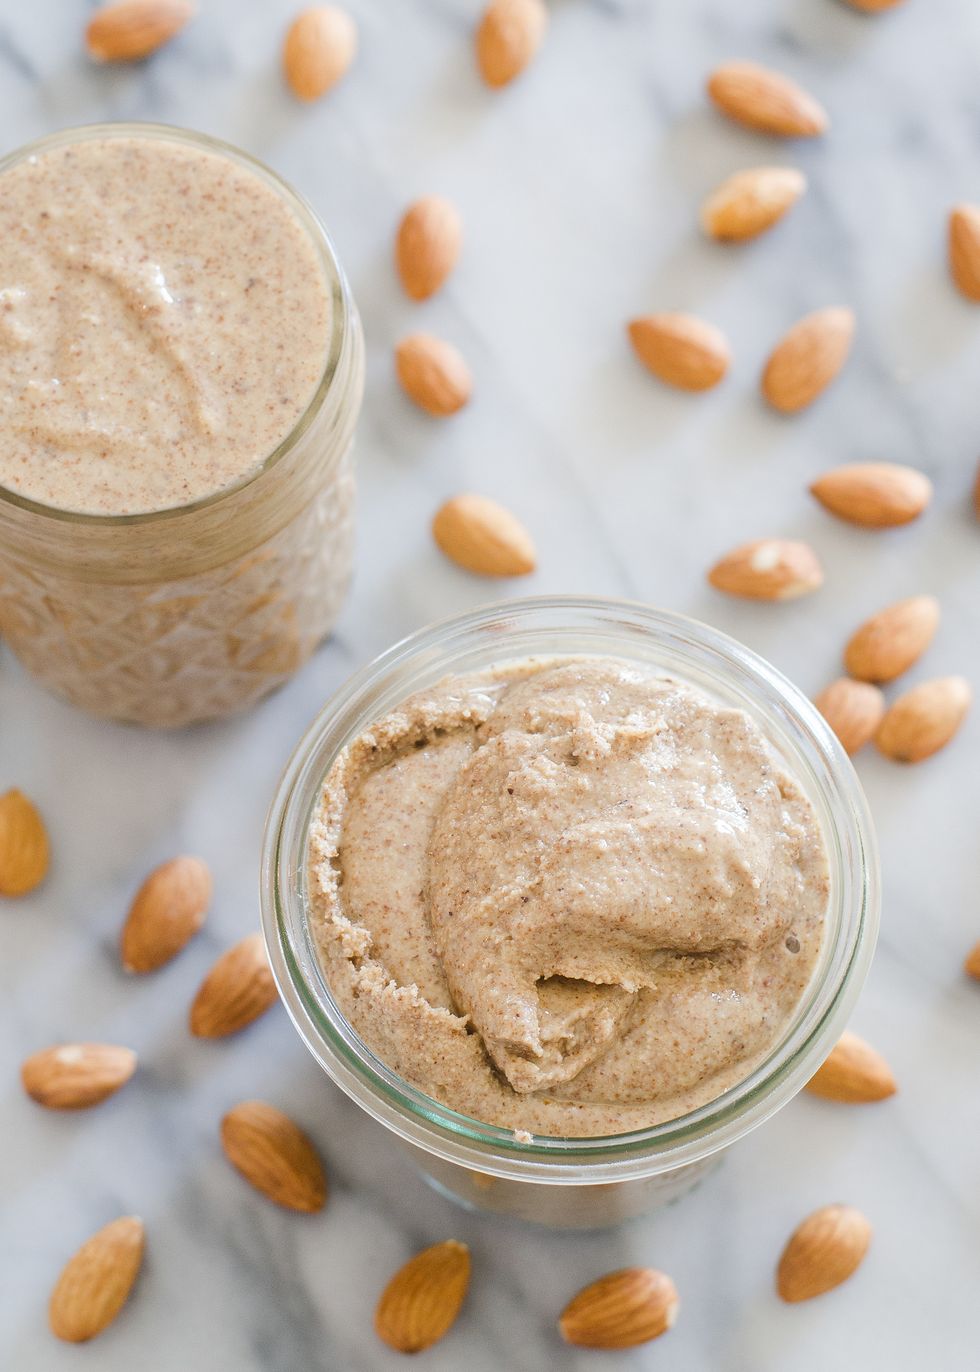 How to Make Almond Butter (1 ingredient, no oil, easy!) - Texanerin Baking